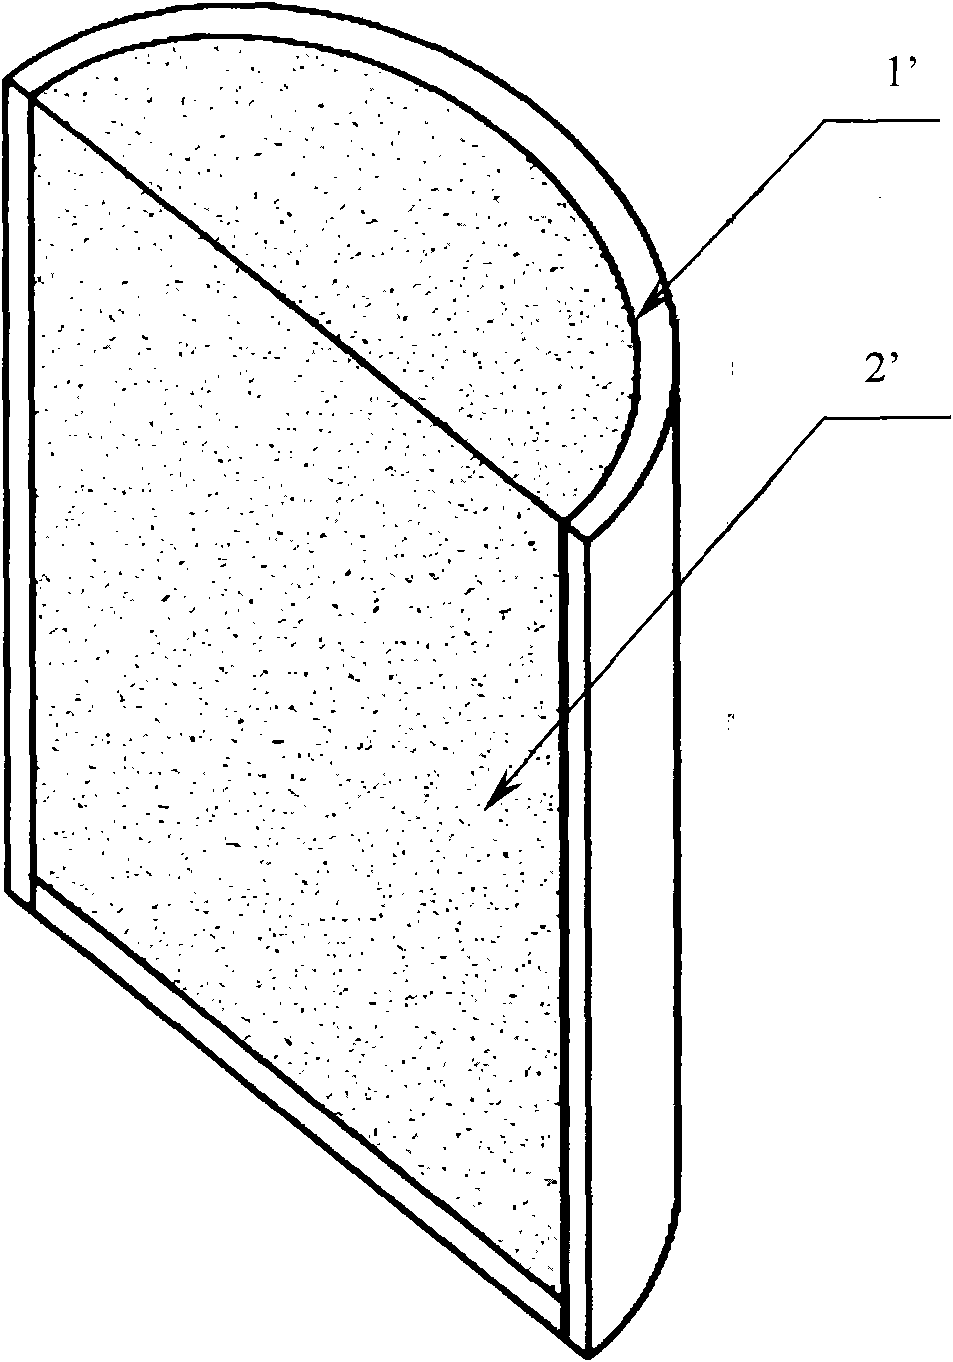 Aluminium-plated particle reinforced aluminum-matrix composite material and preparation method thereof